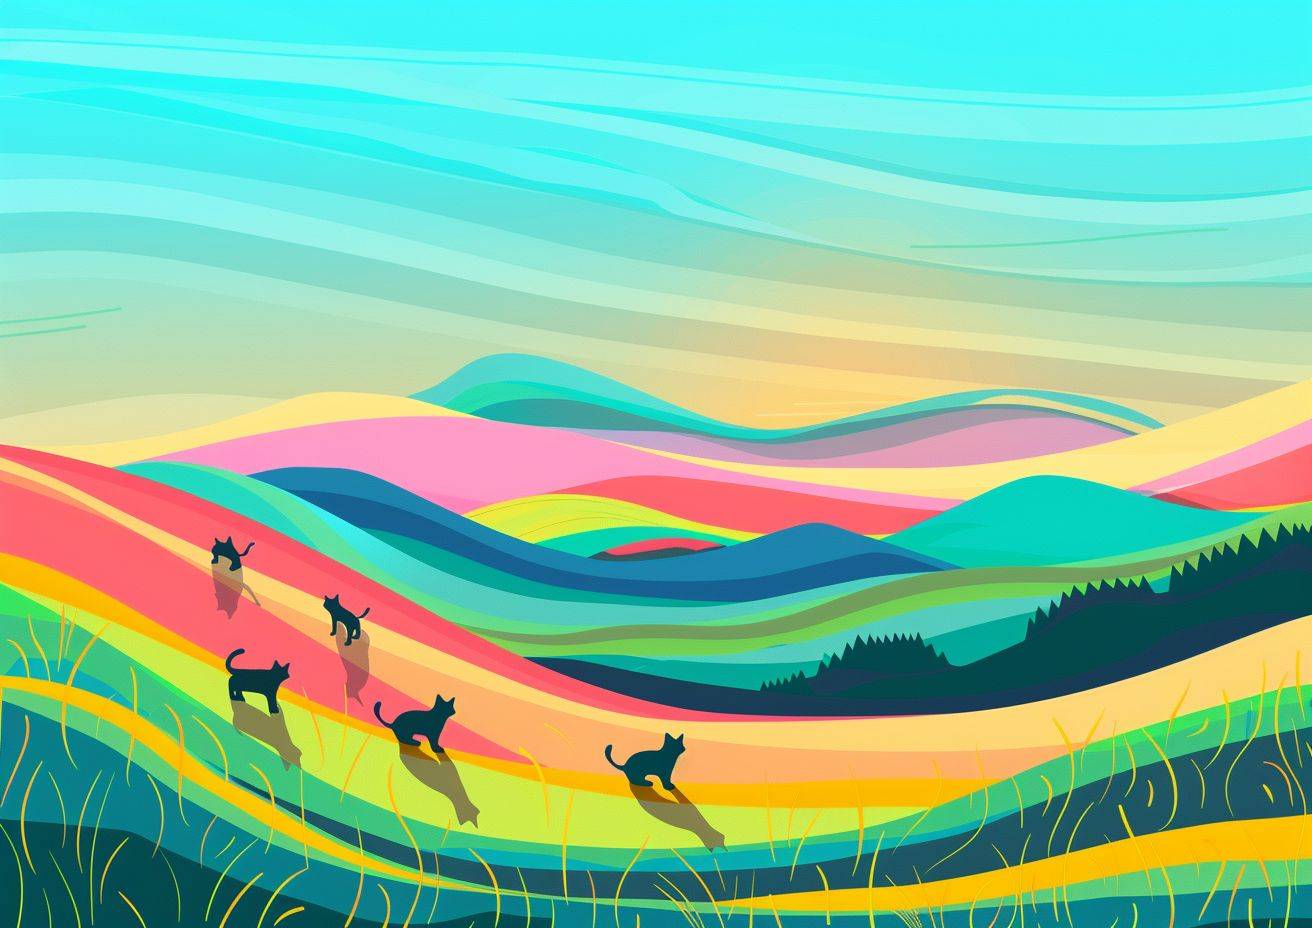 Simplified cartoon image, depicting a picturesque landscape with an unreasonable amount of cats, negative space, datamoshing glitch effect